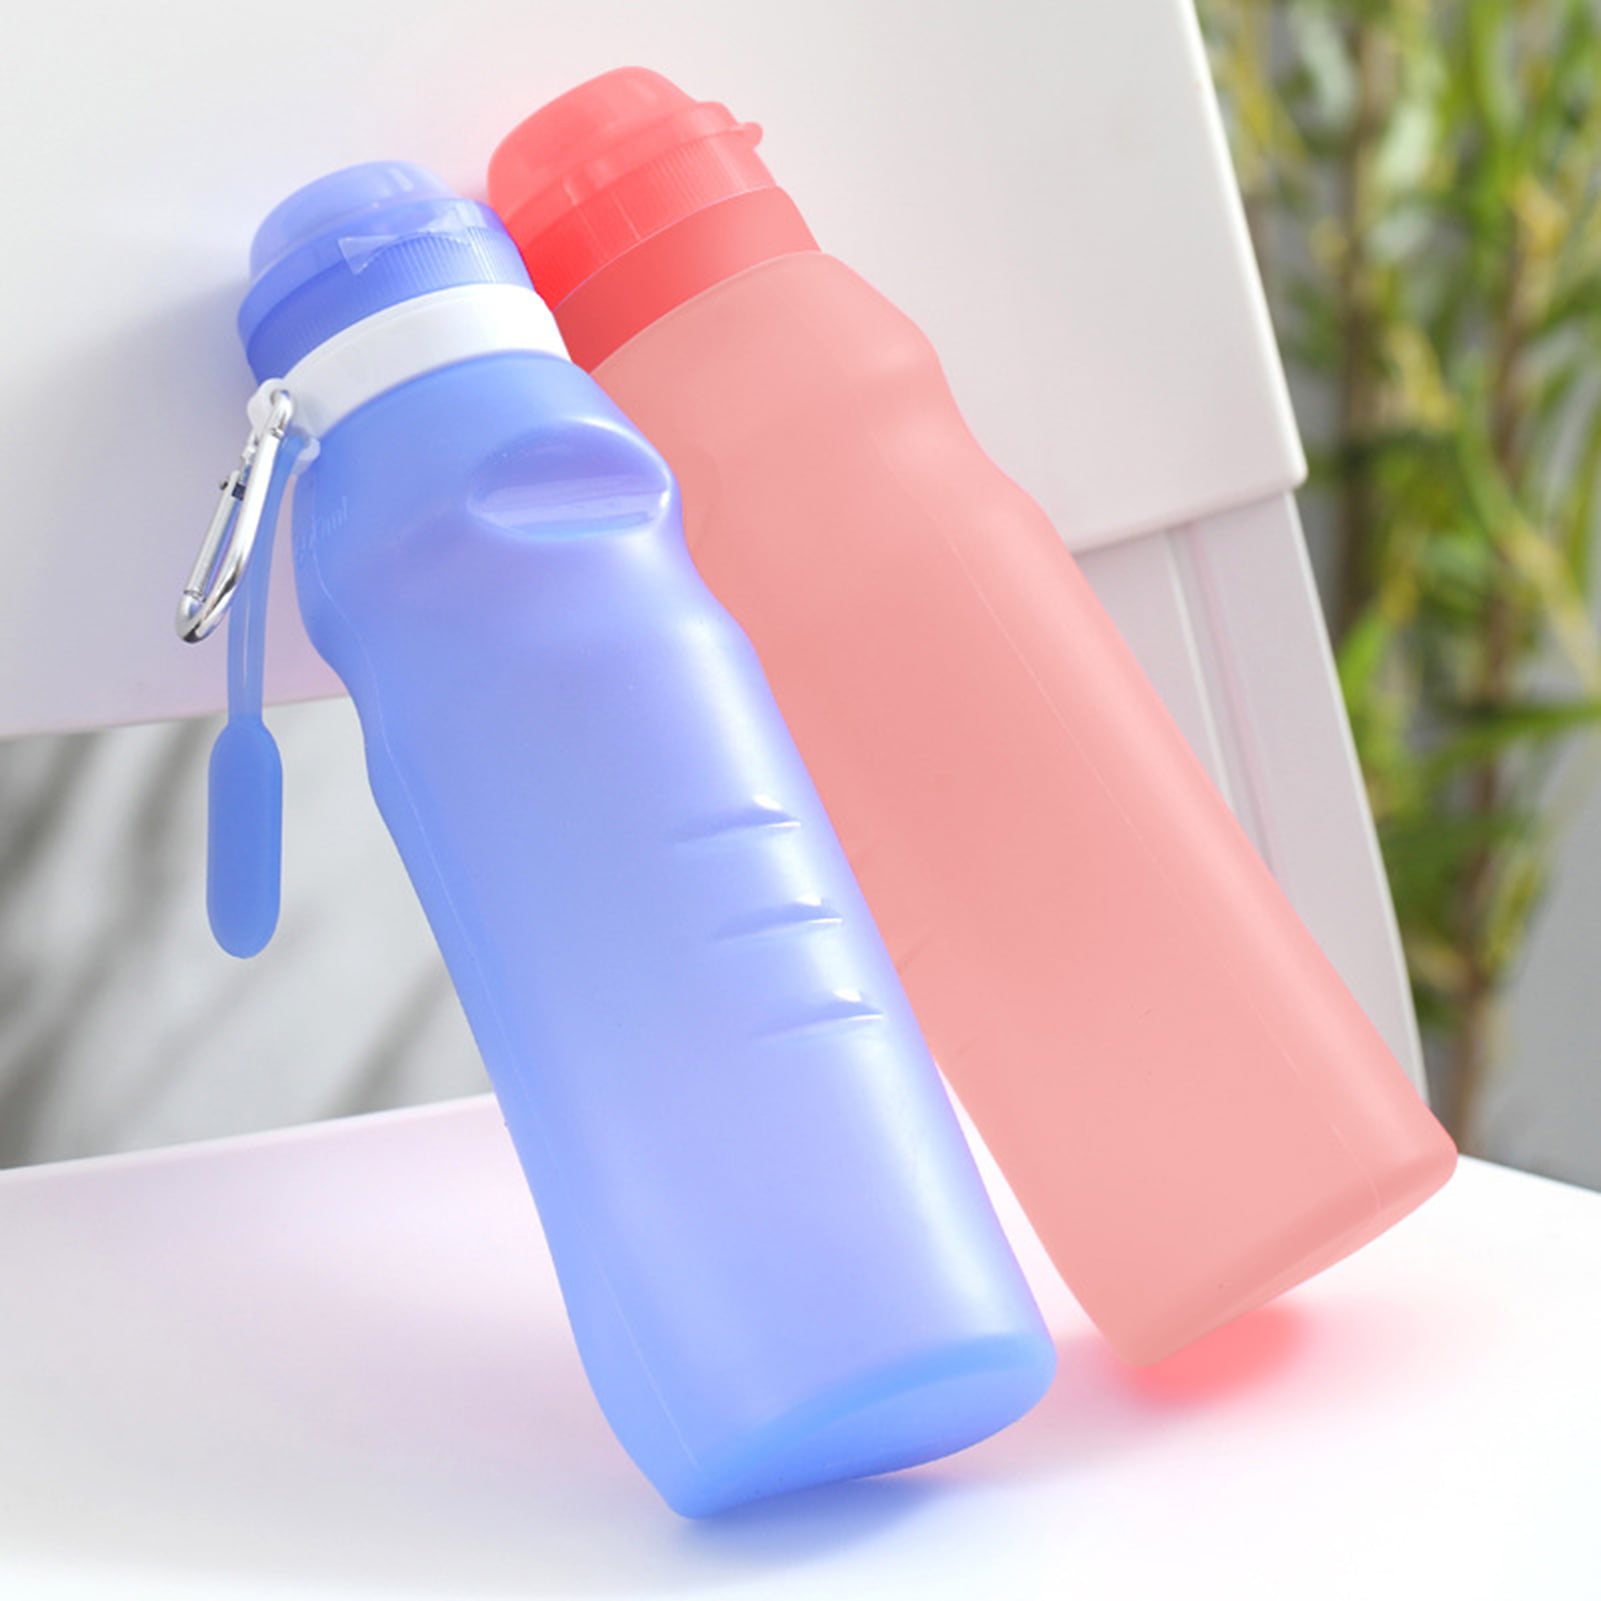 Grandest Birch 600ml Water Bottle Food Grade Strong Construction Silicone Easy to Carry Foldable Water Tumbler for Home Water Bott, Size: 24.5, Blue